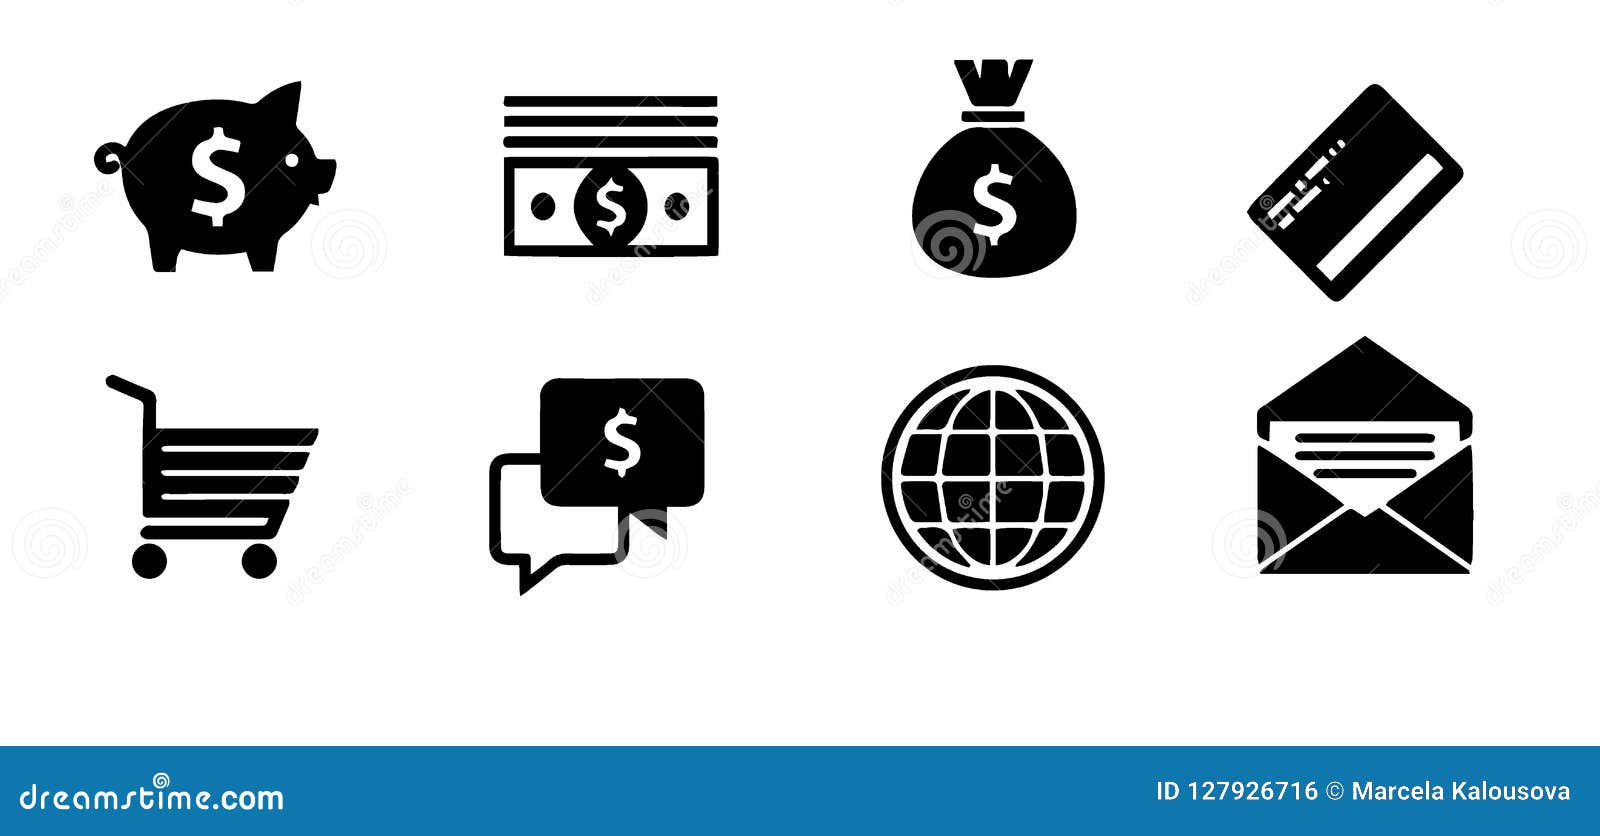 business icons, management and human resources set1.  eps 10. more icons in my portfolio.